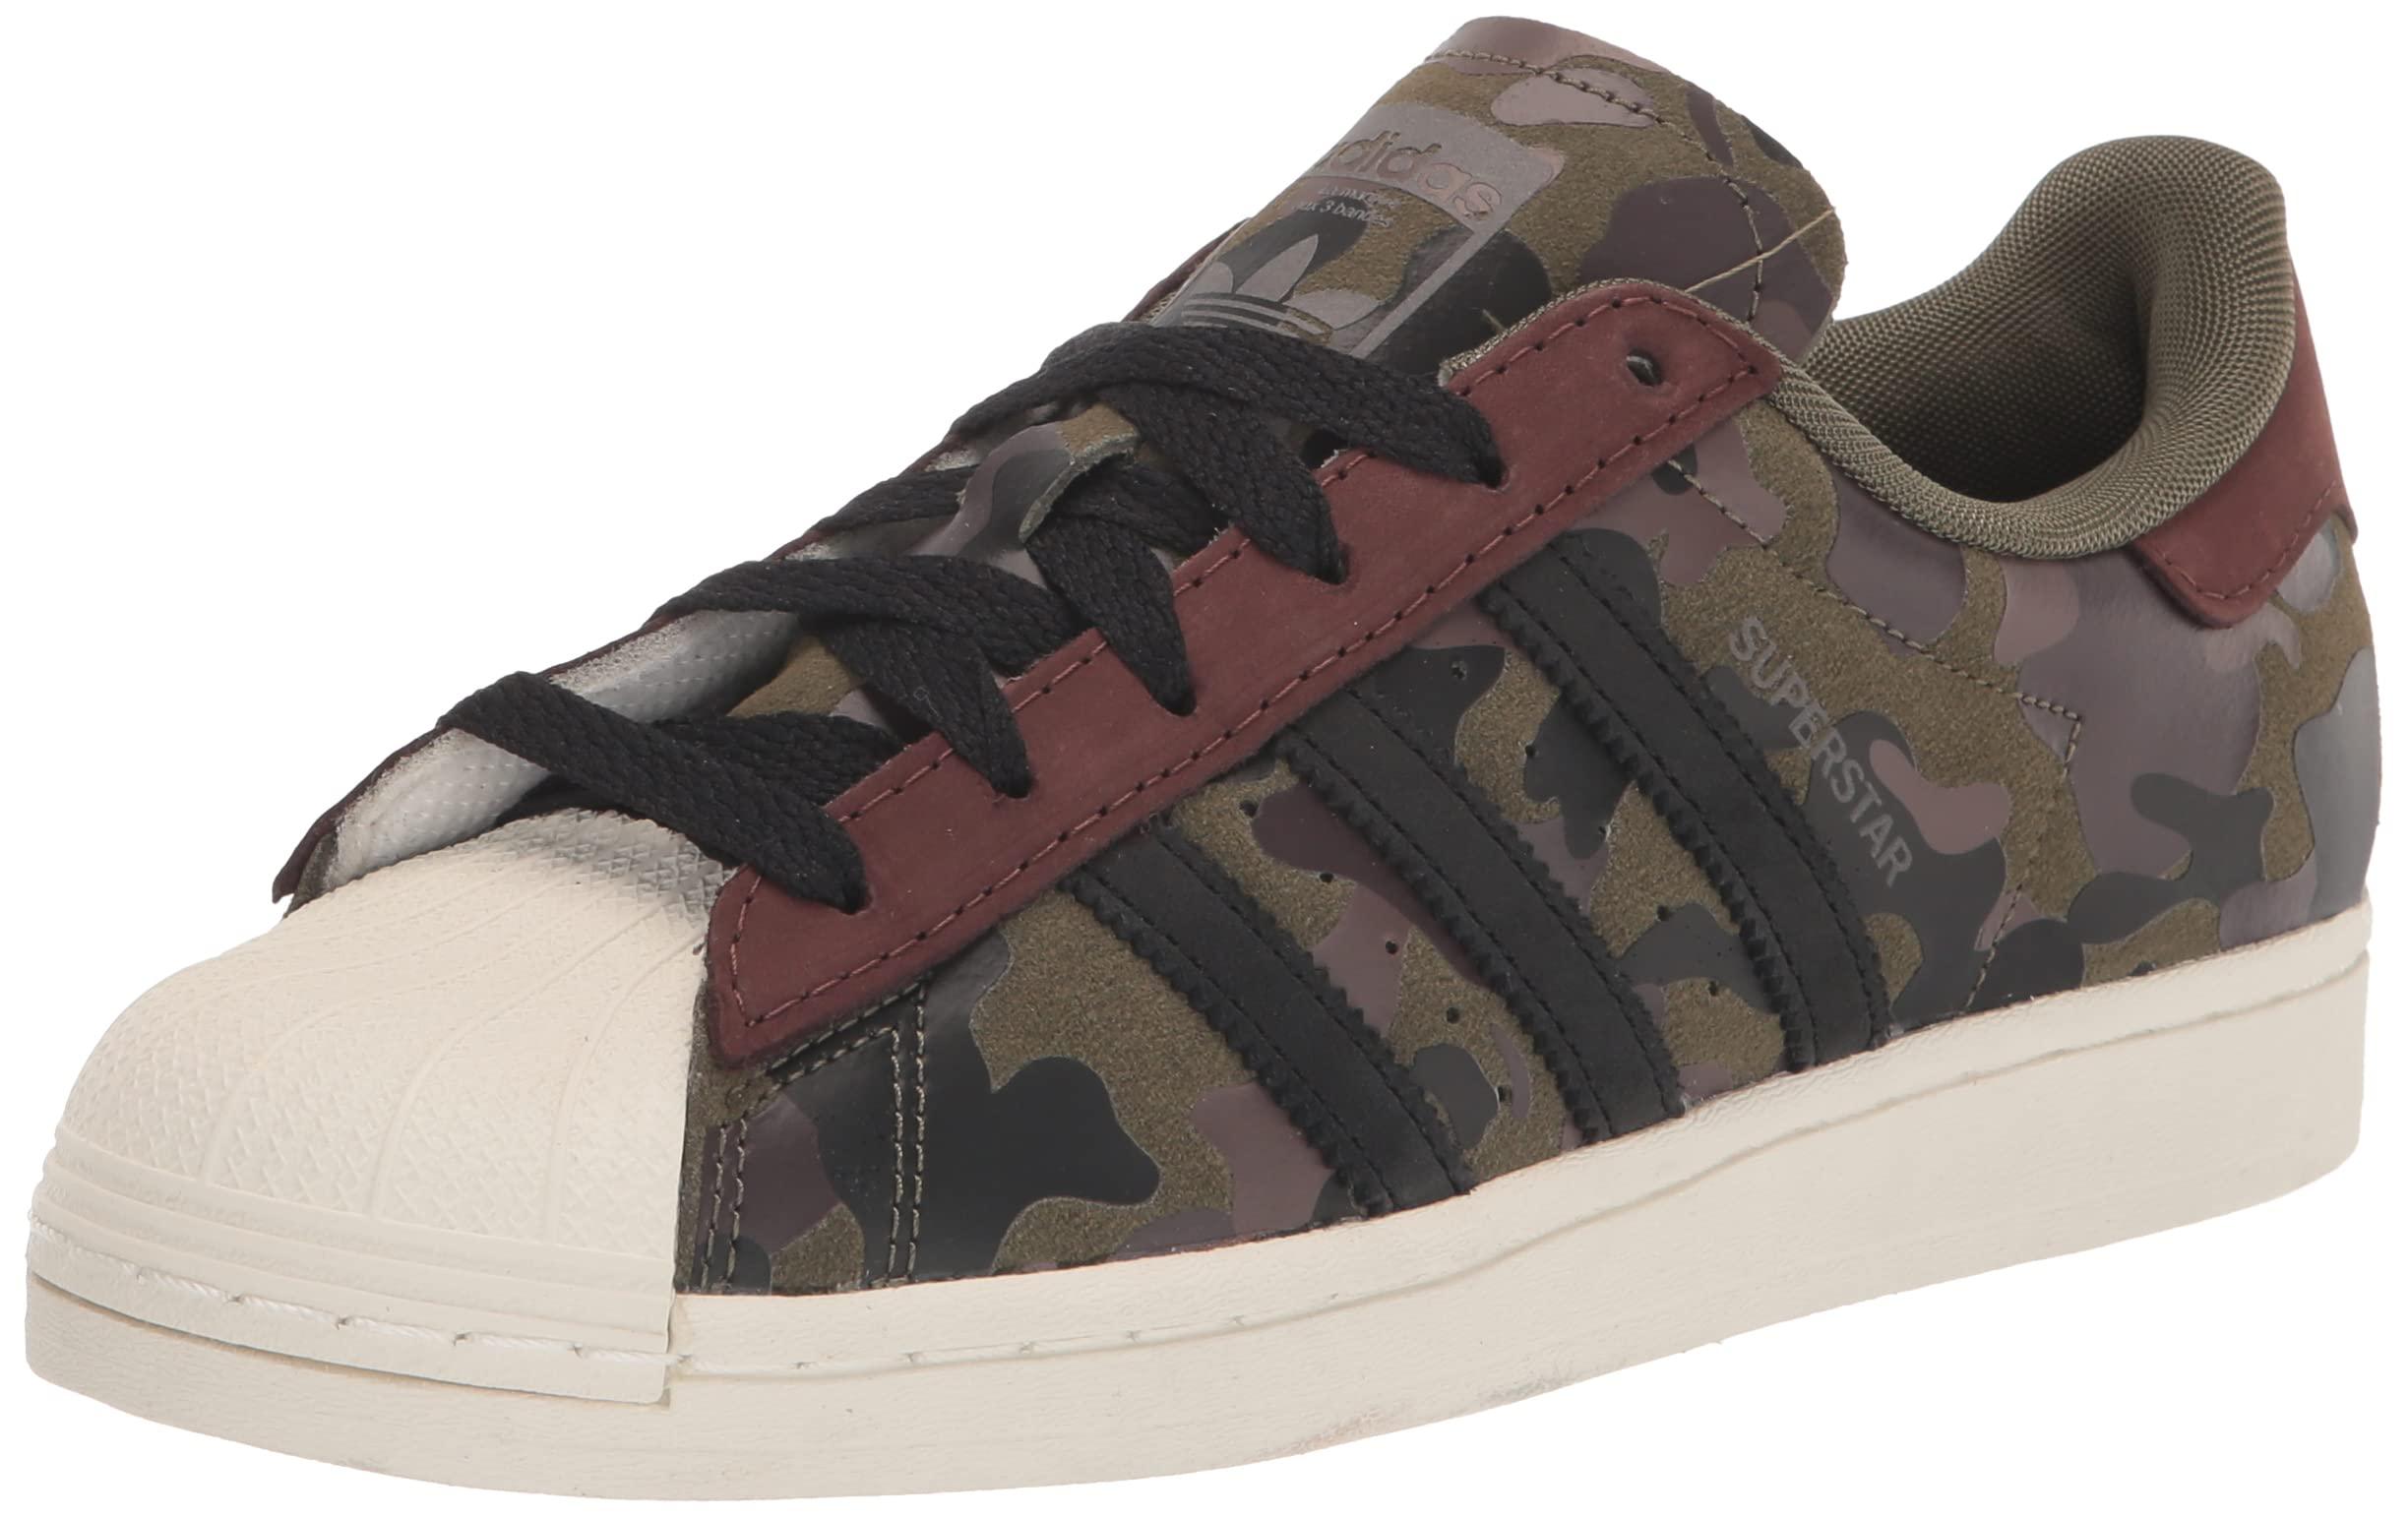 Adidas Camouflage Shoes for Men